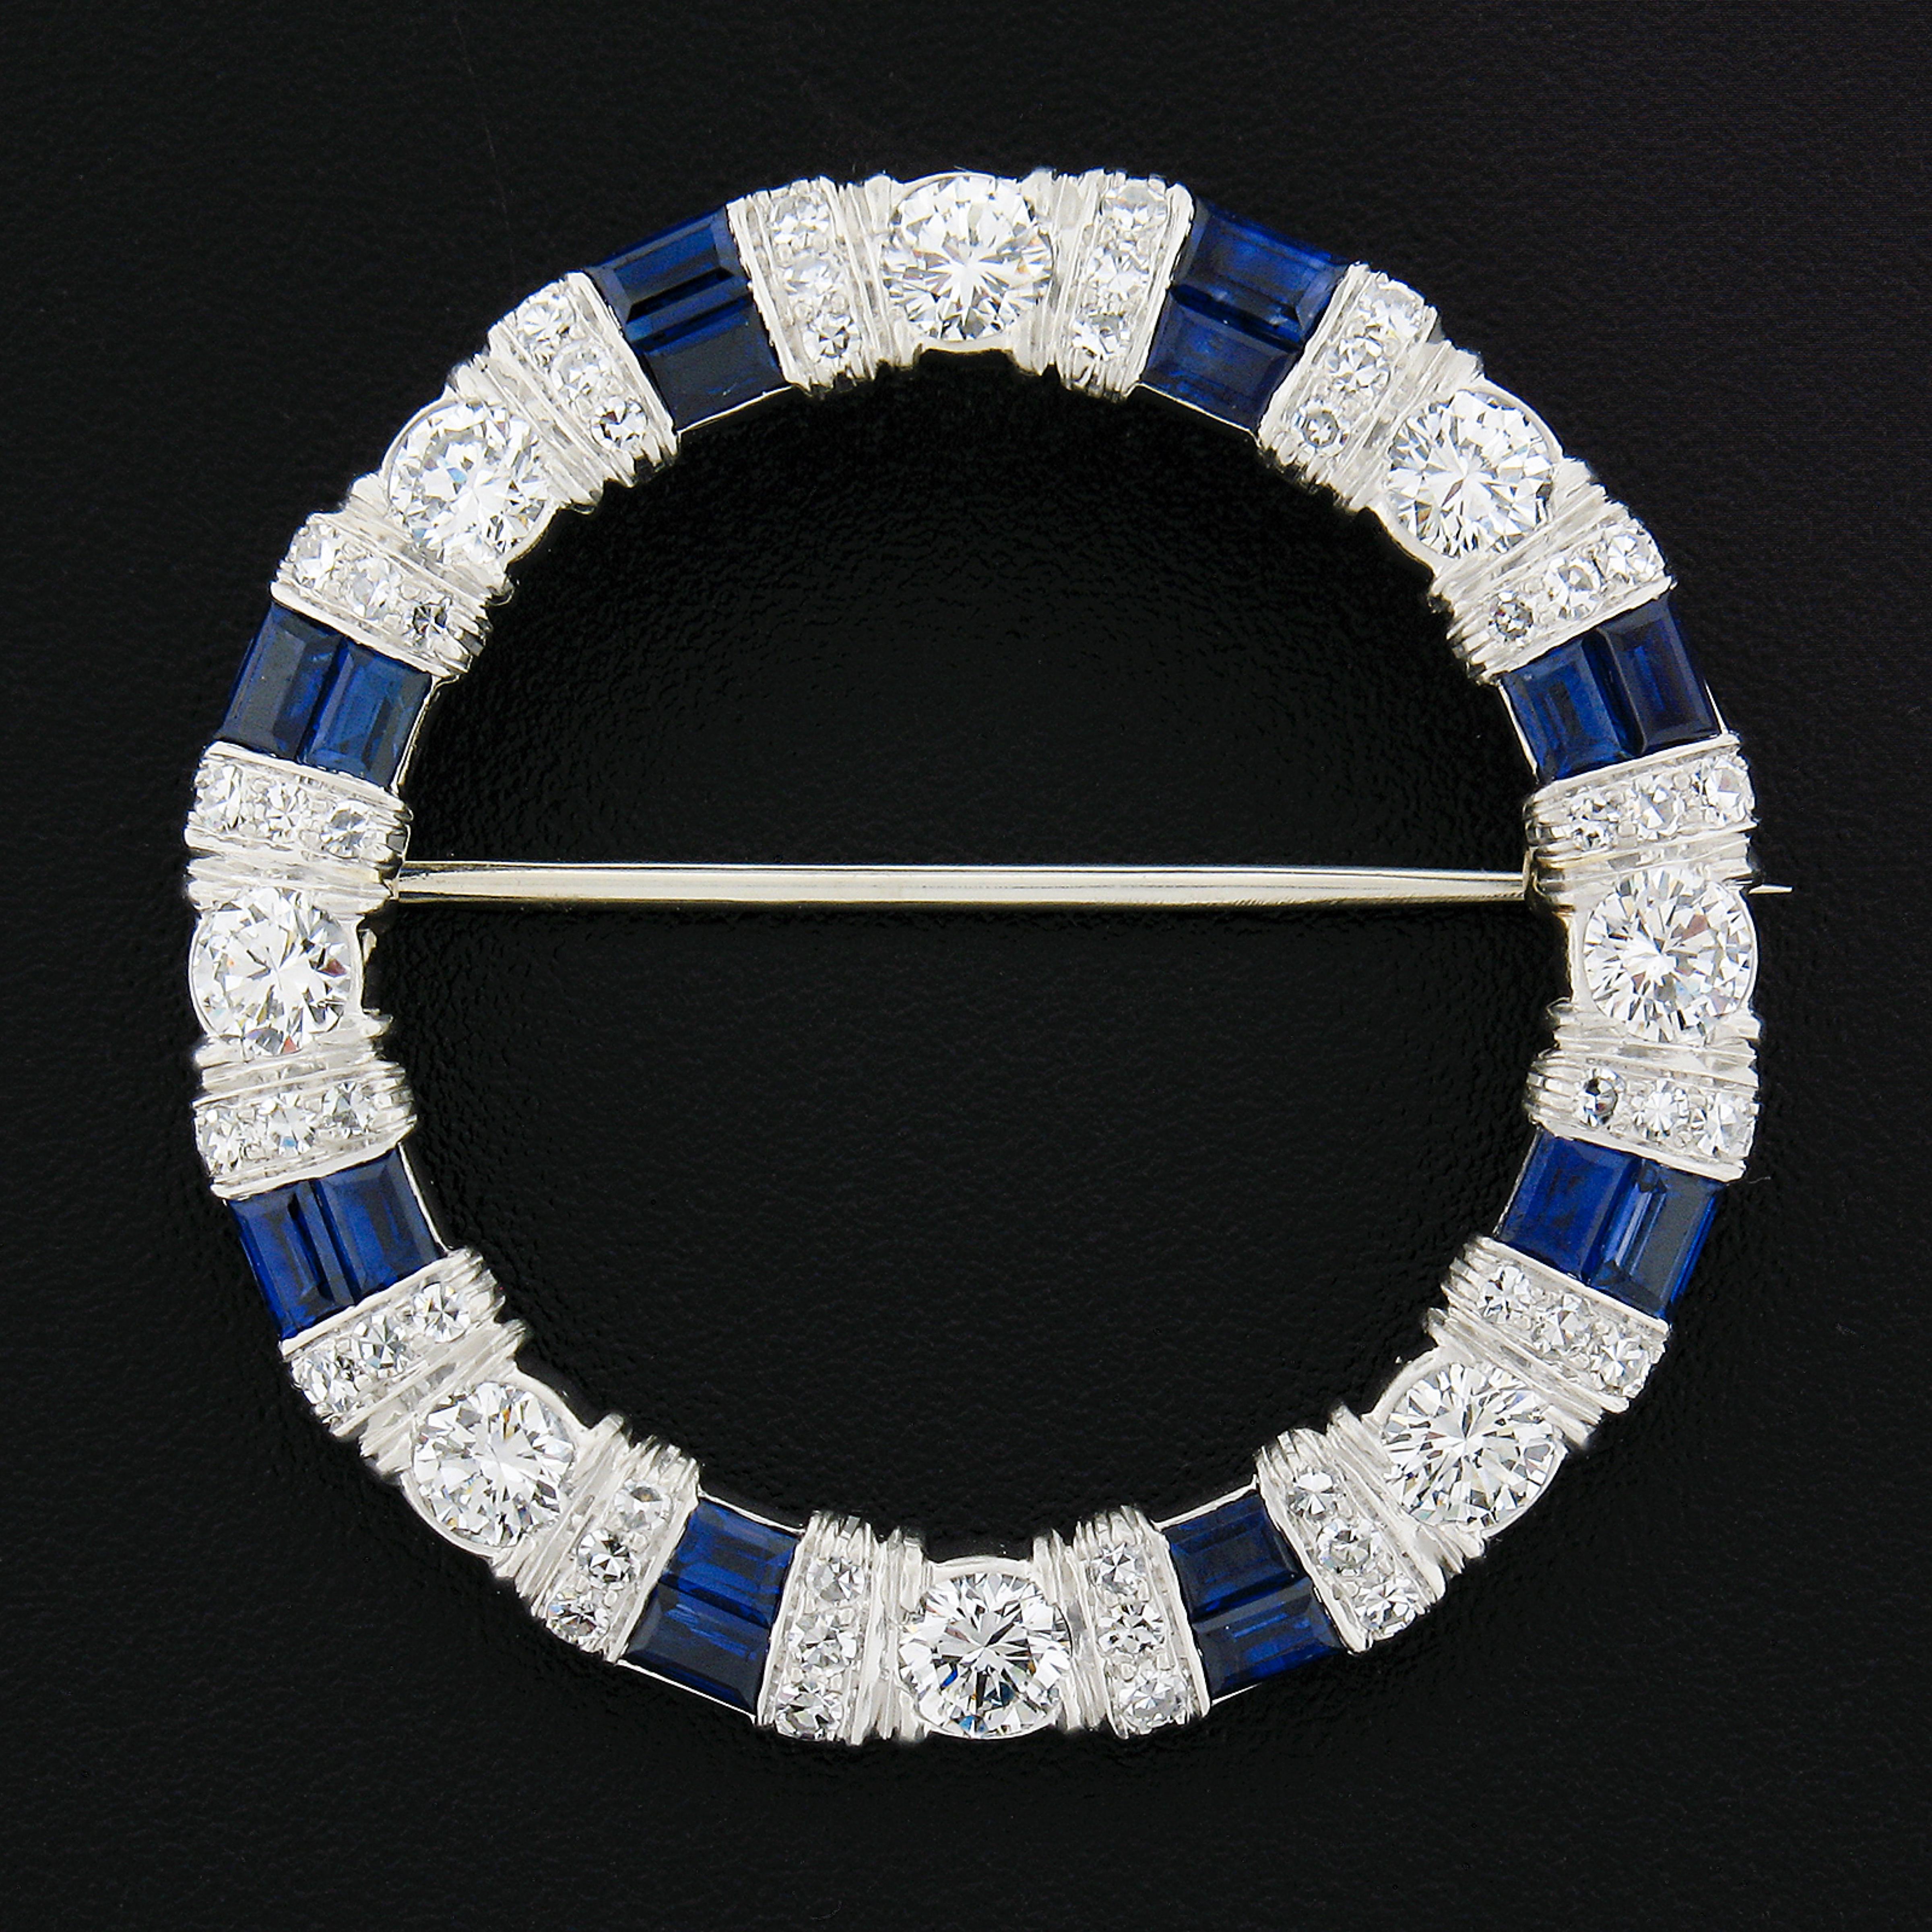 This breathtaking wreath brooch by Maurice Tishman was crafted in solid platinum & 14k white gold pin. The wreath is adorned with old single & transitional cut diamonds that alternate with natural sapphire stones around the design. These sapphires